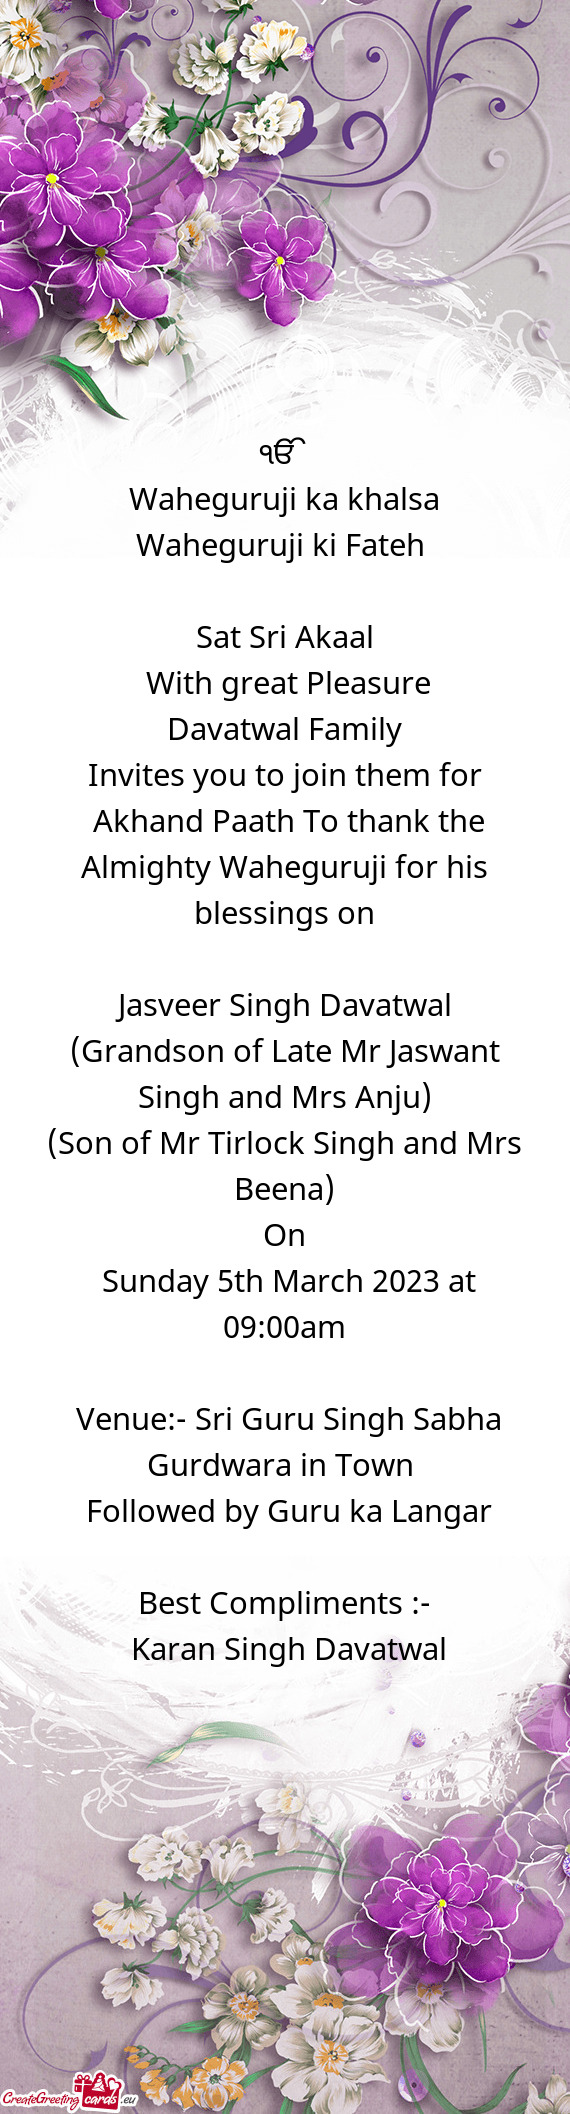 Akhand Paath To thank the Almighty Waheguruji for his blessings on